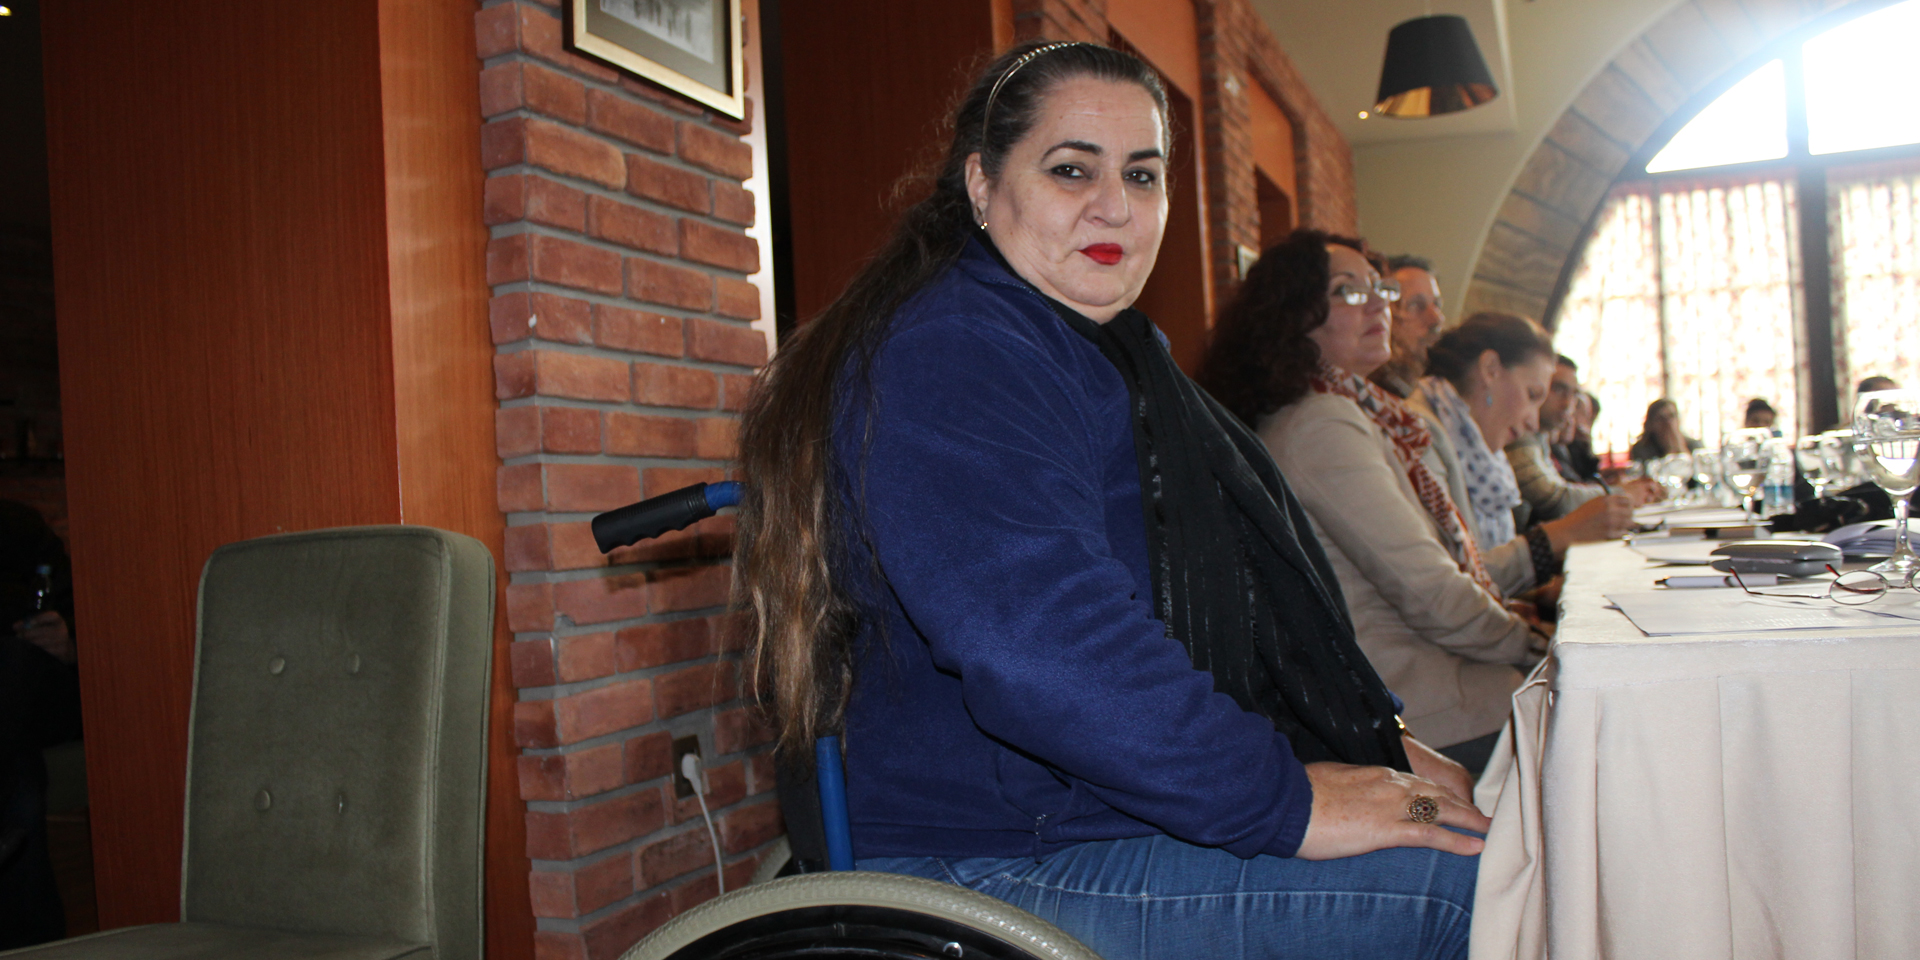 Image of a woman in a wheelchair sitting alongside others at a large table.